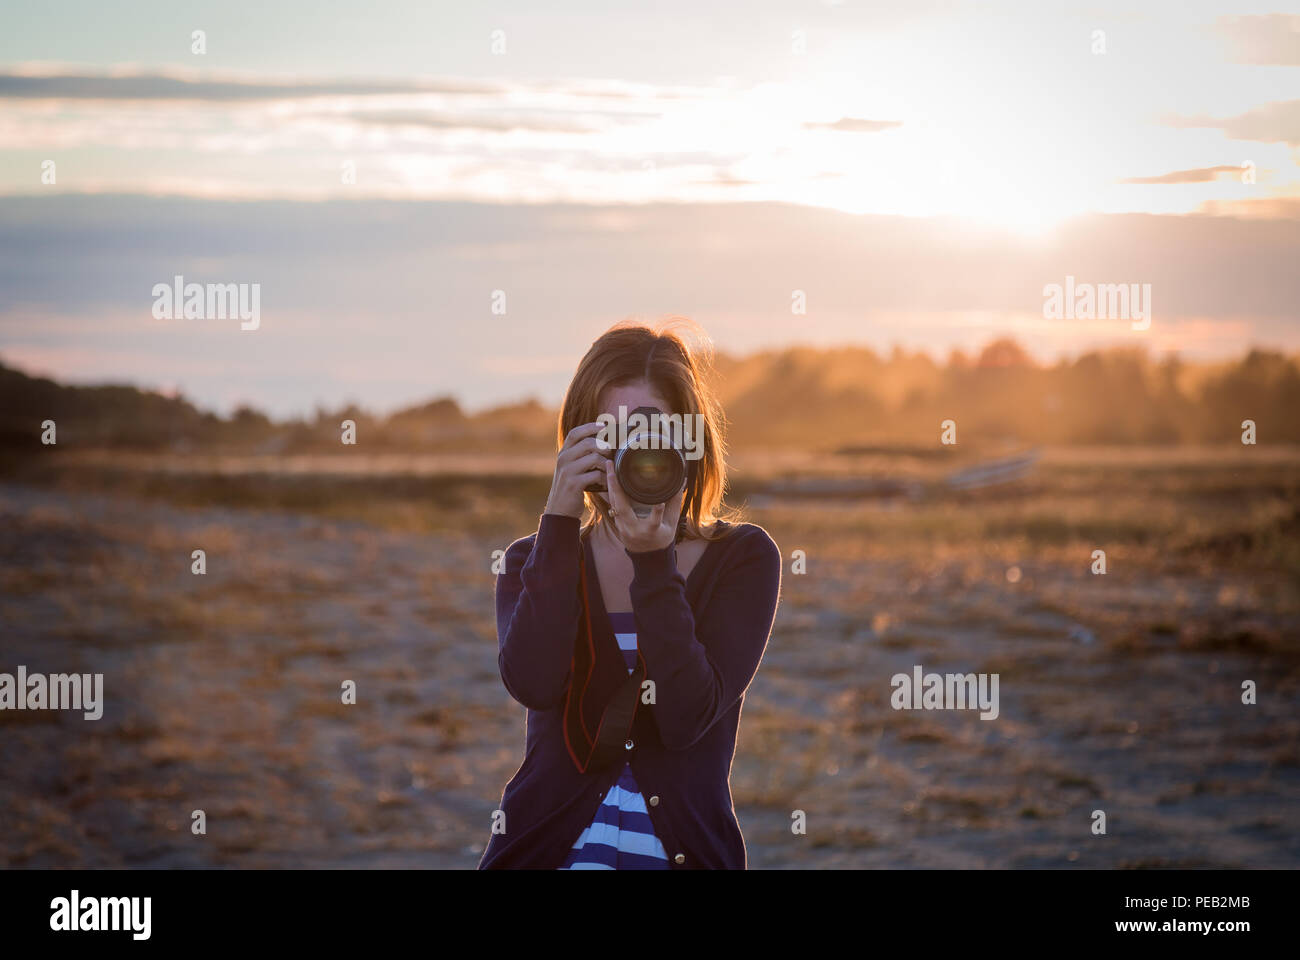 A girl taking a photo with a DSLR with the sunset in the background. Stock Photo